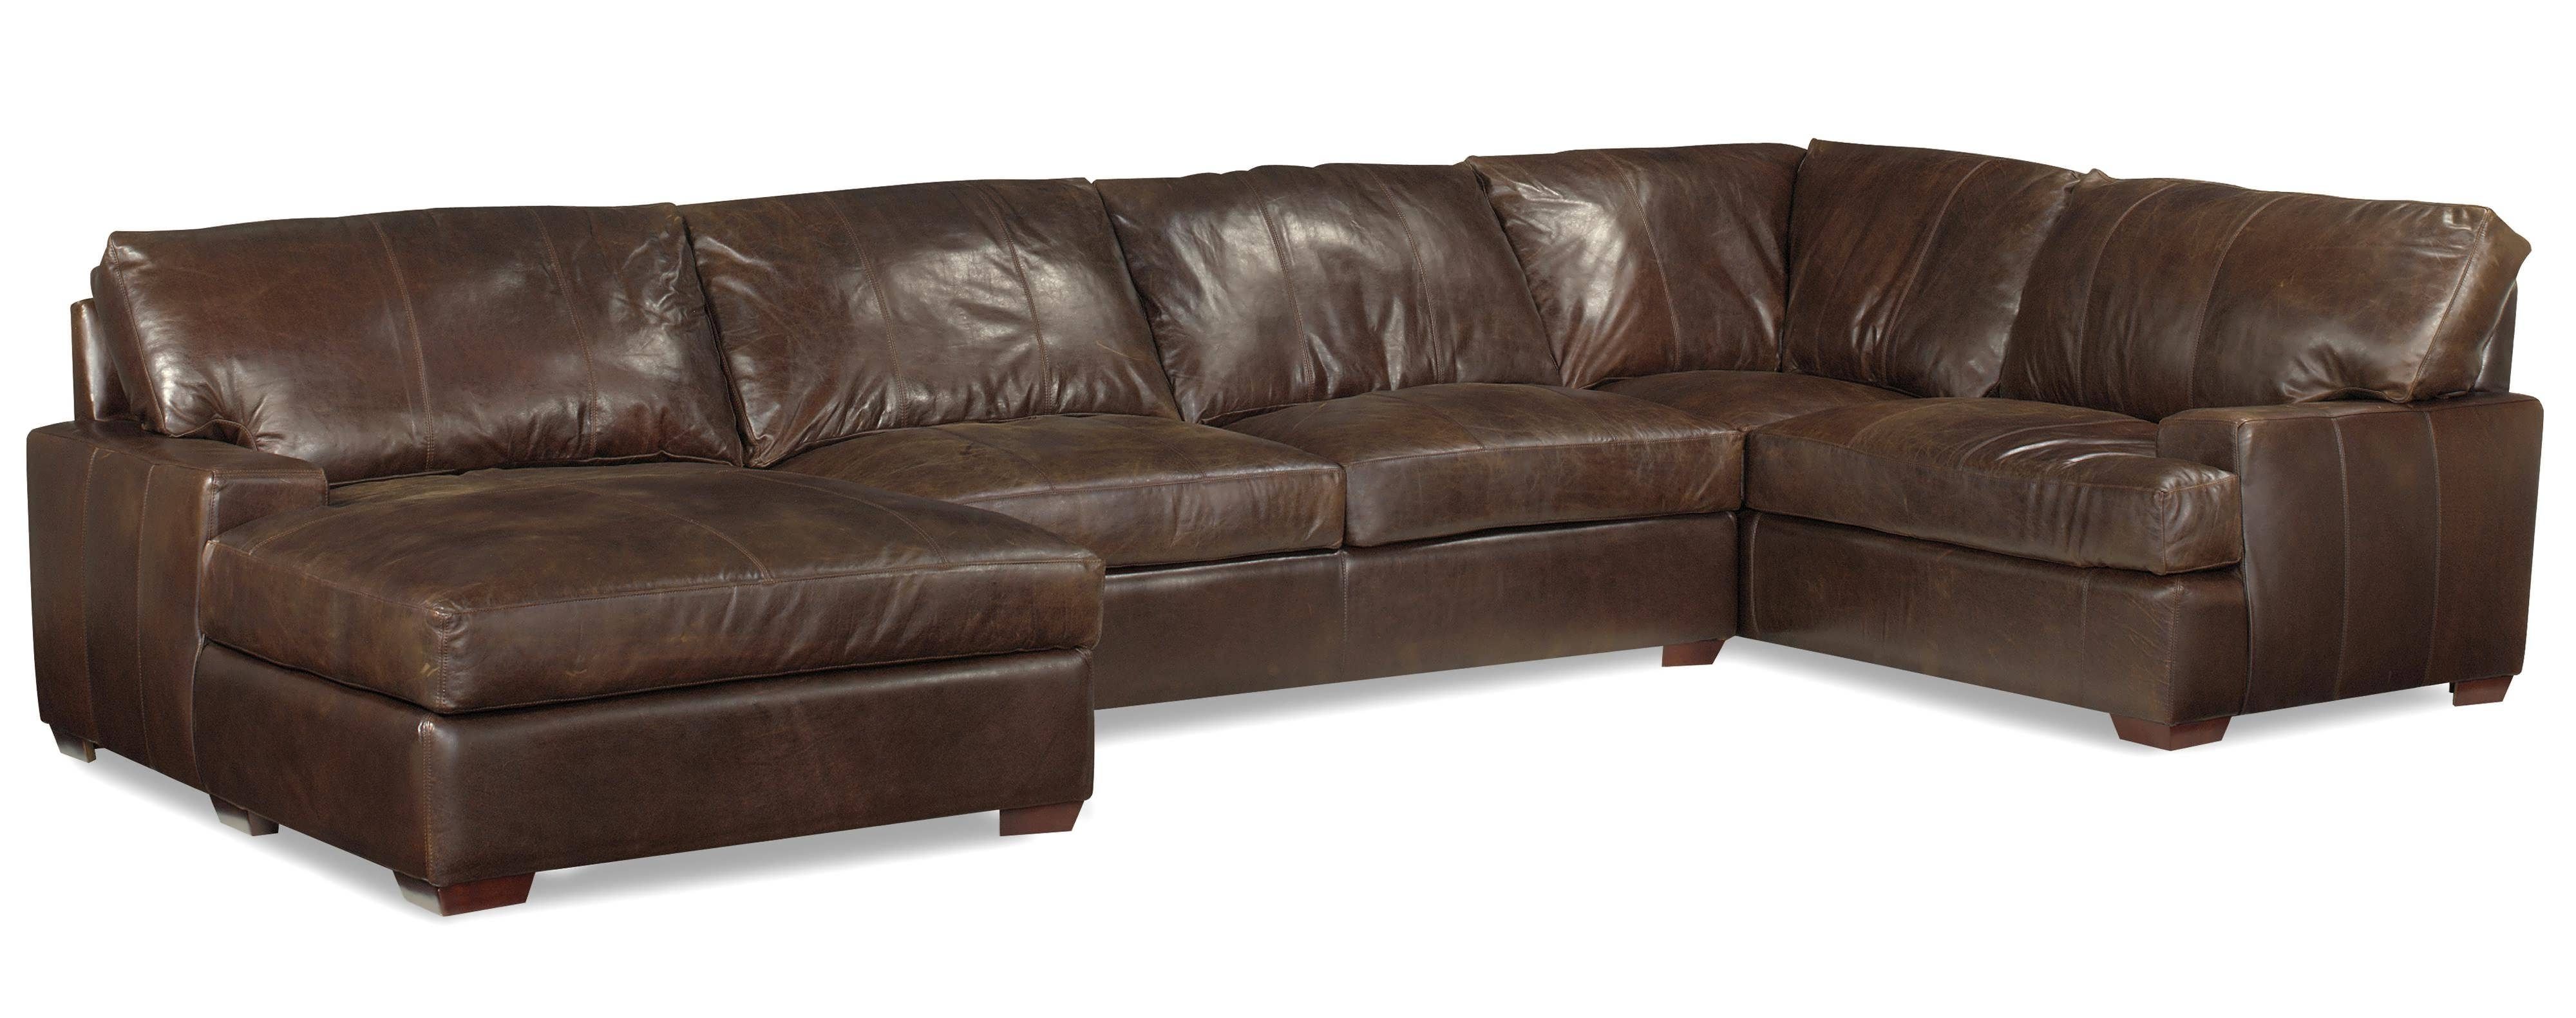 genuine leather sectional sofa with chaise